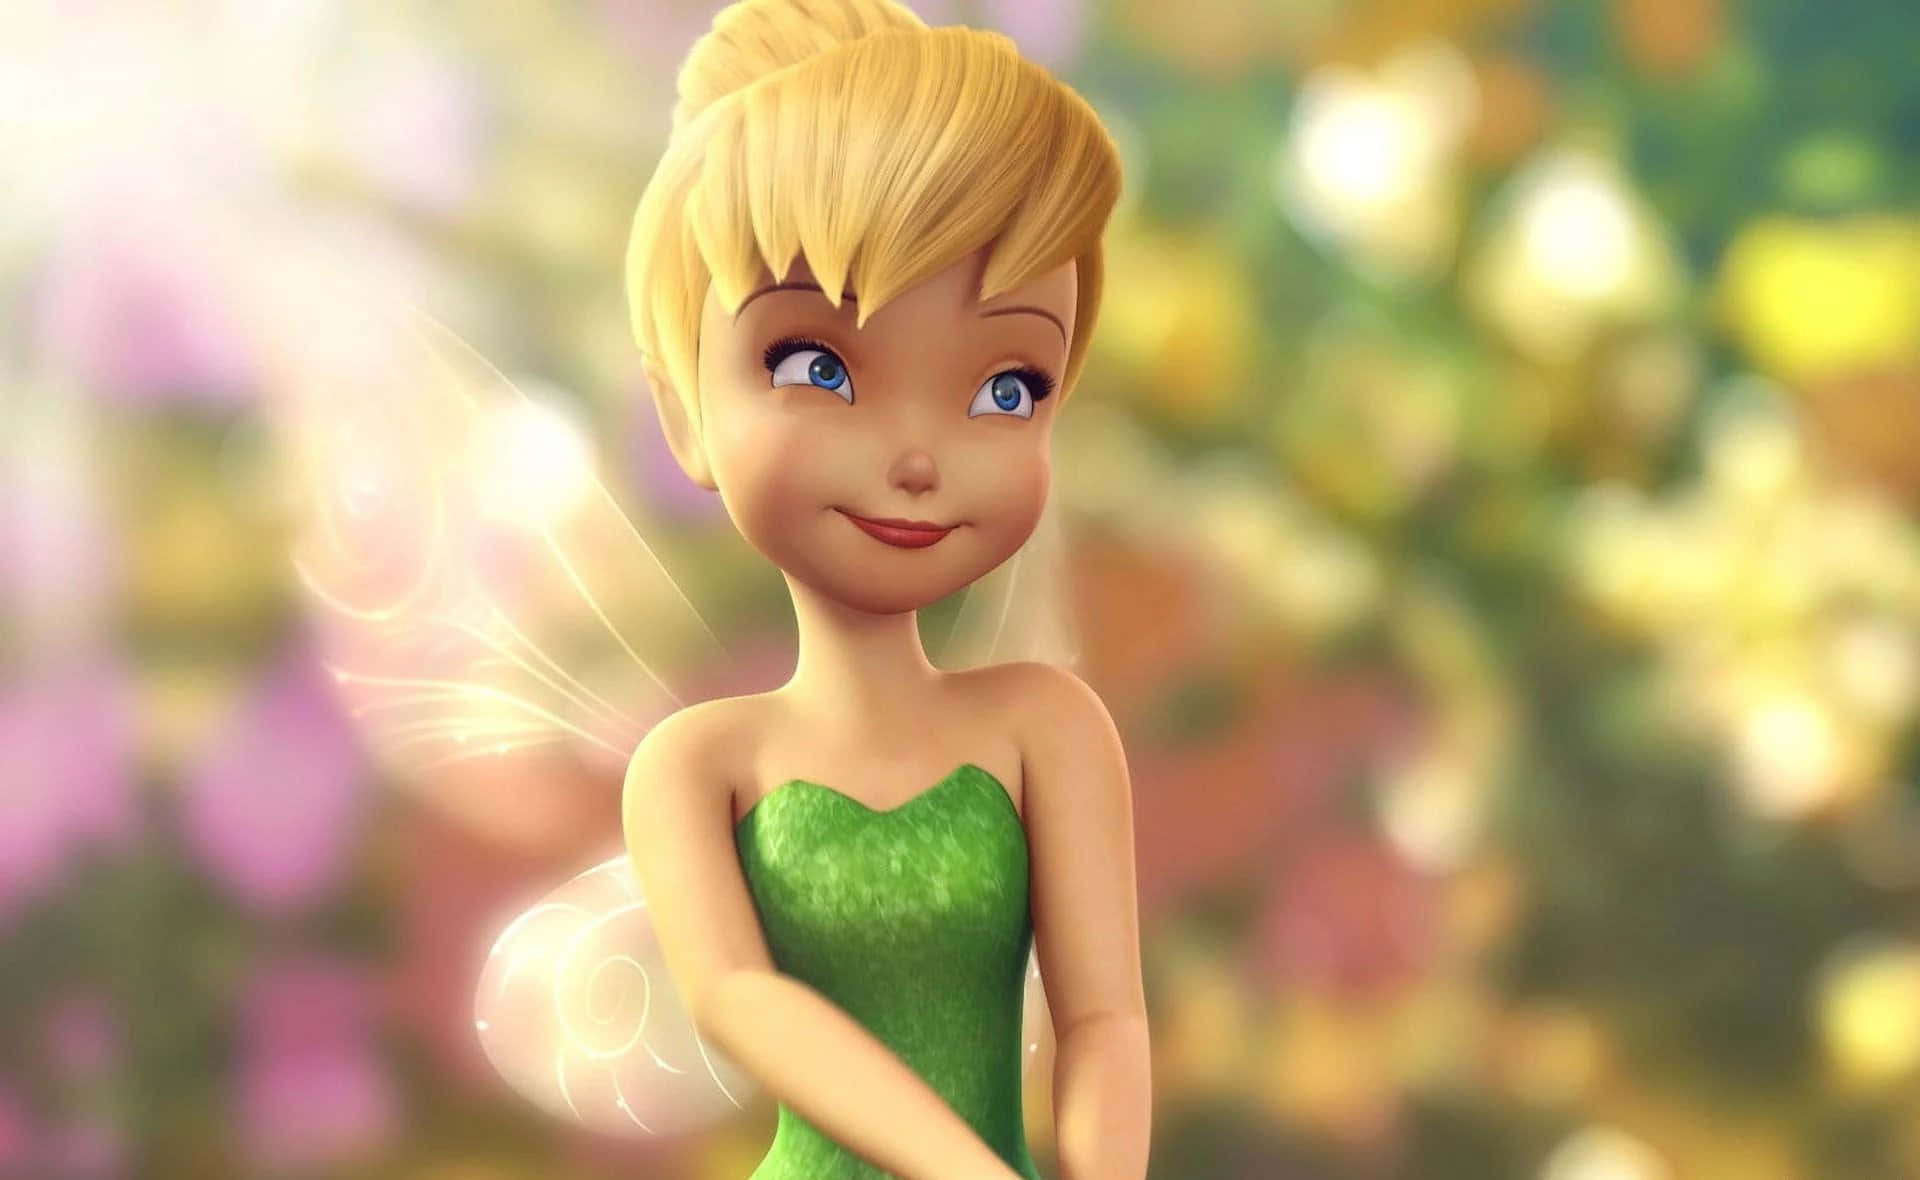 Join Tinkerbell on an enchanted journey!